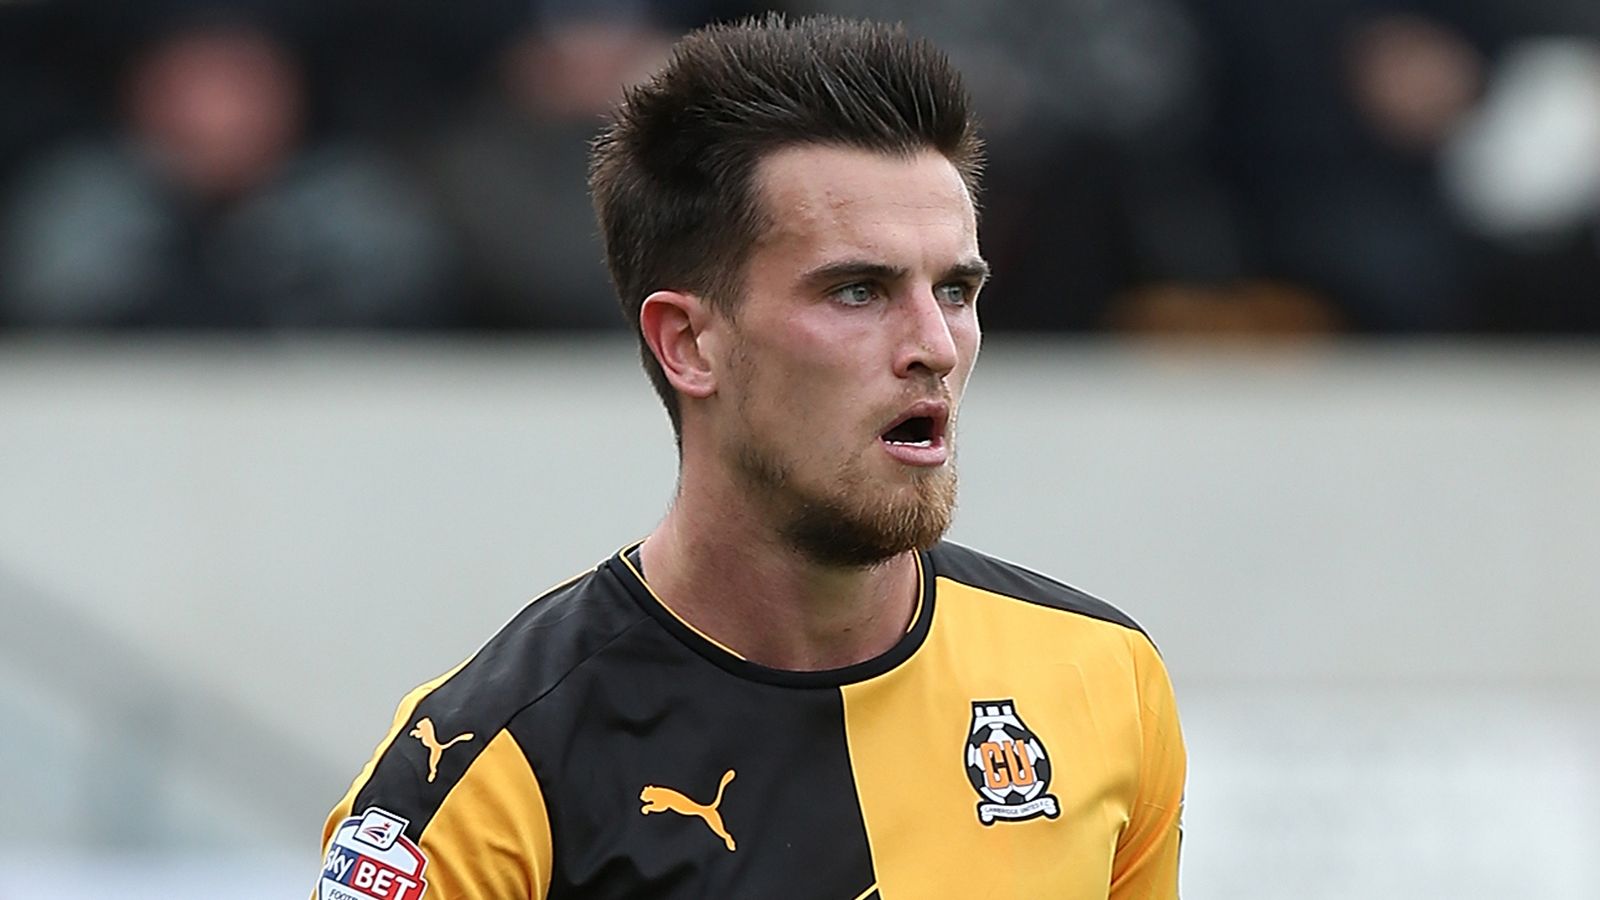 Ryan Donaldson signs for Plymouth Argyle after Cambridge United exit ...